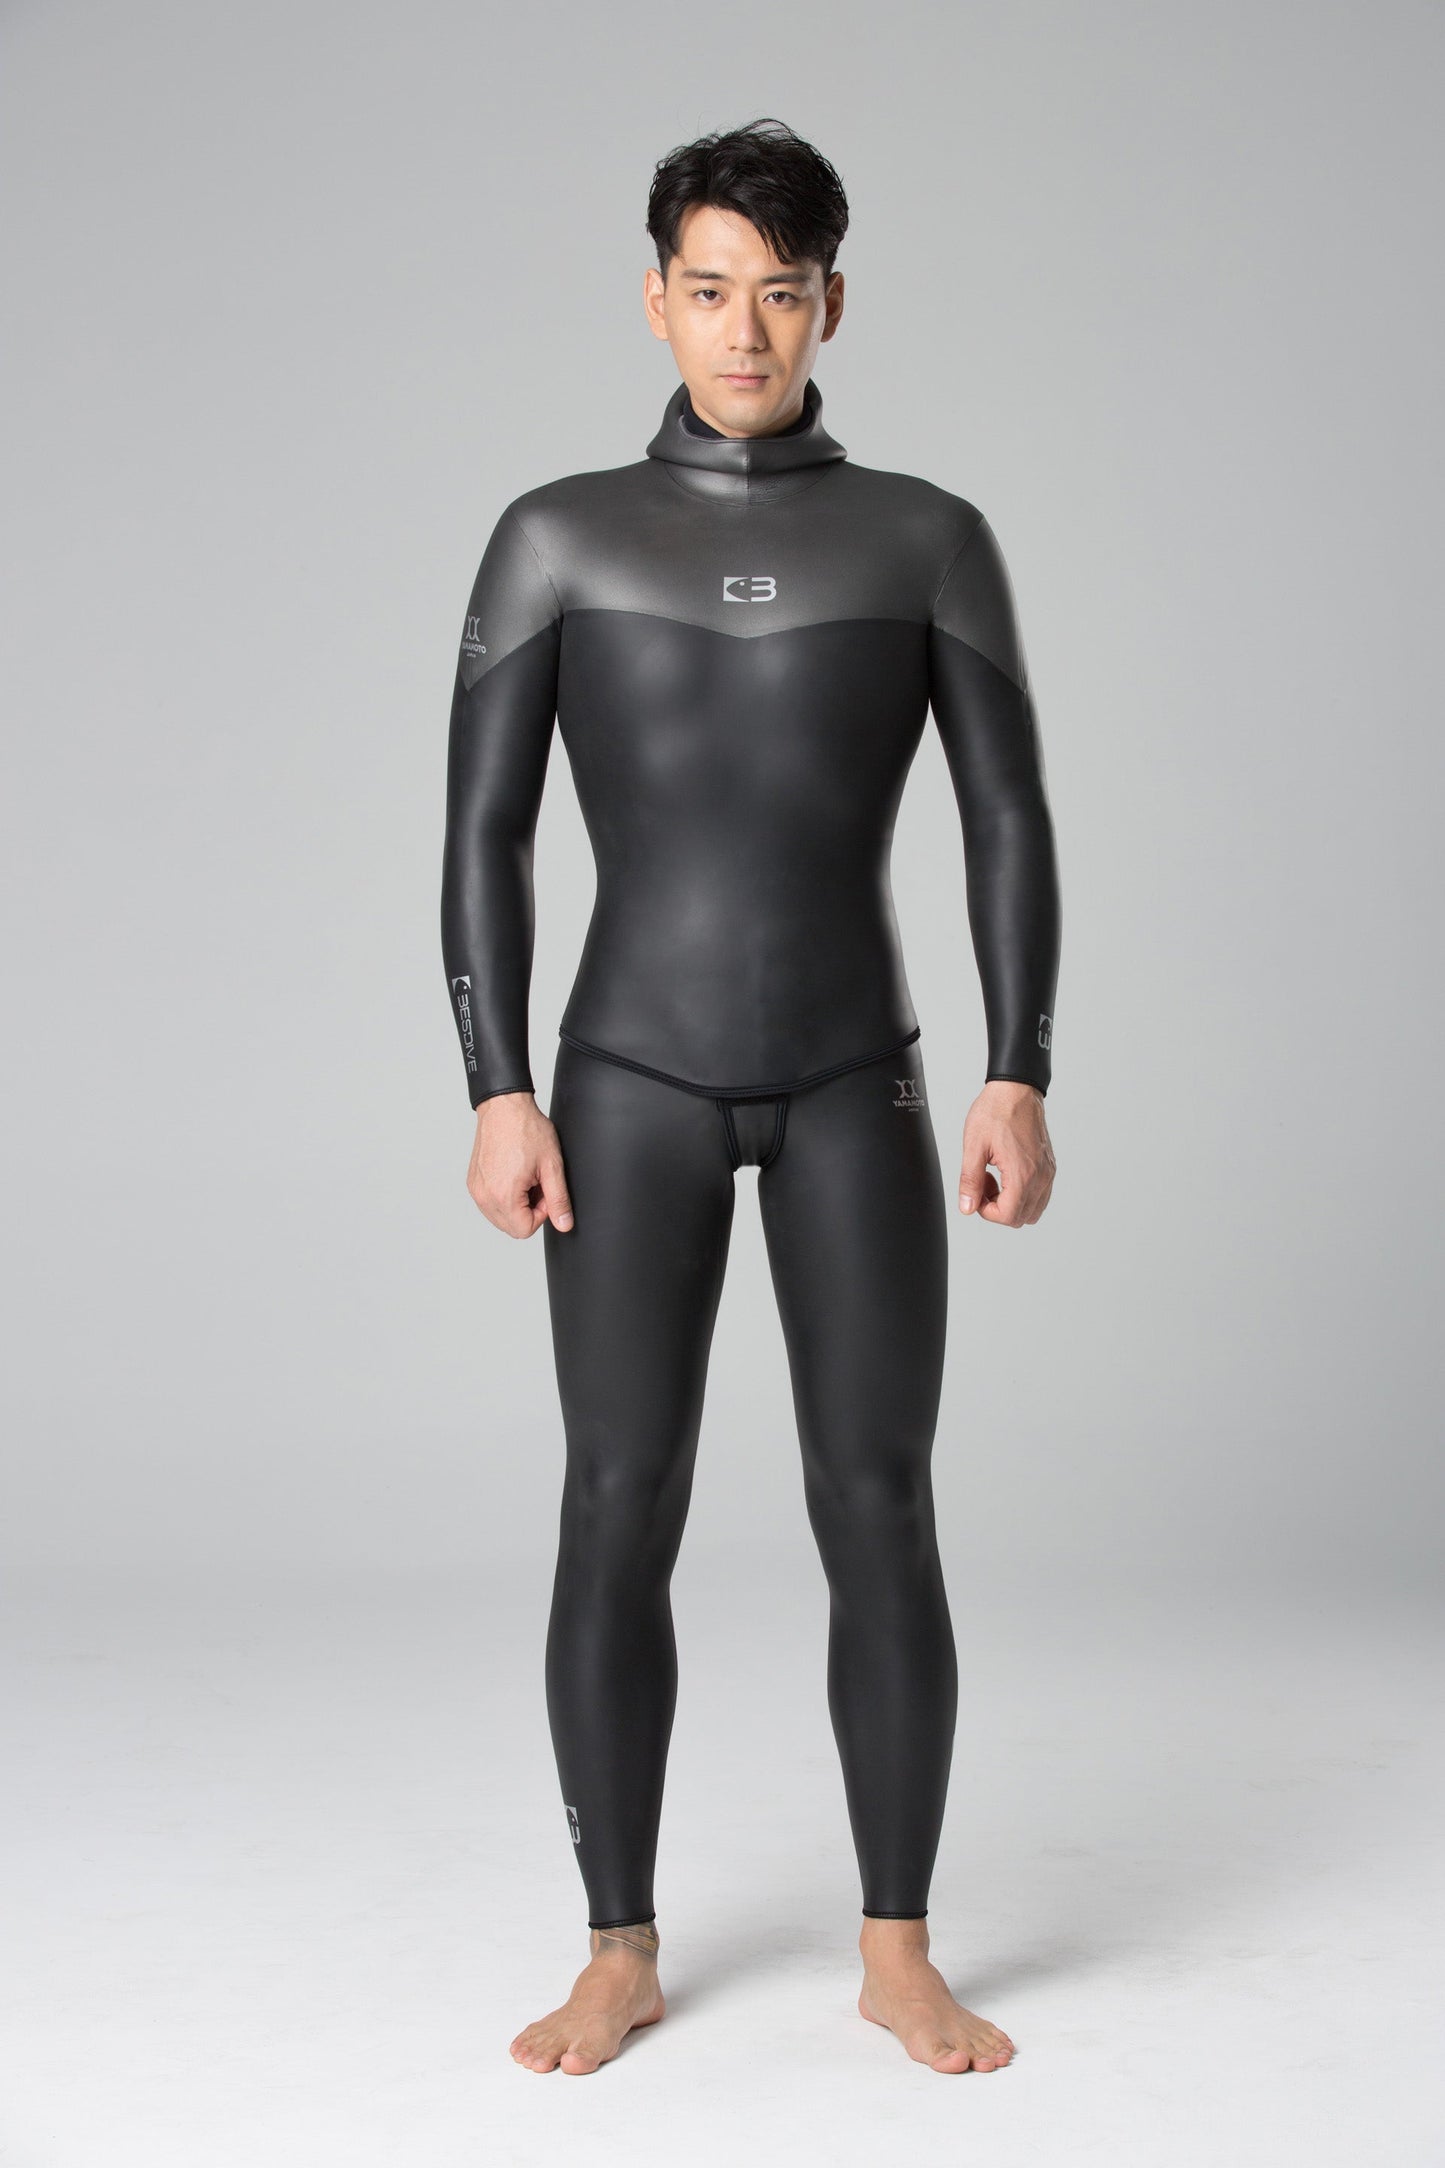 MoreHey Smooth-Skin Wetsuit [Tailor-make]